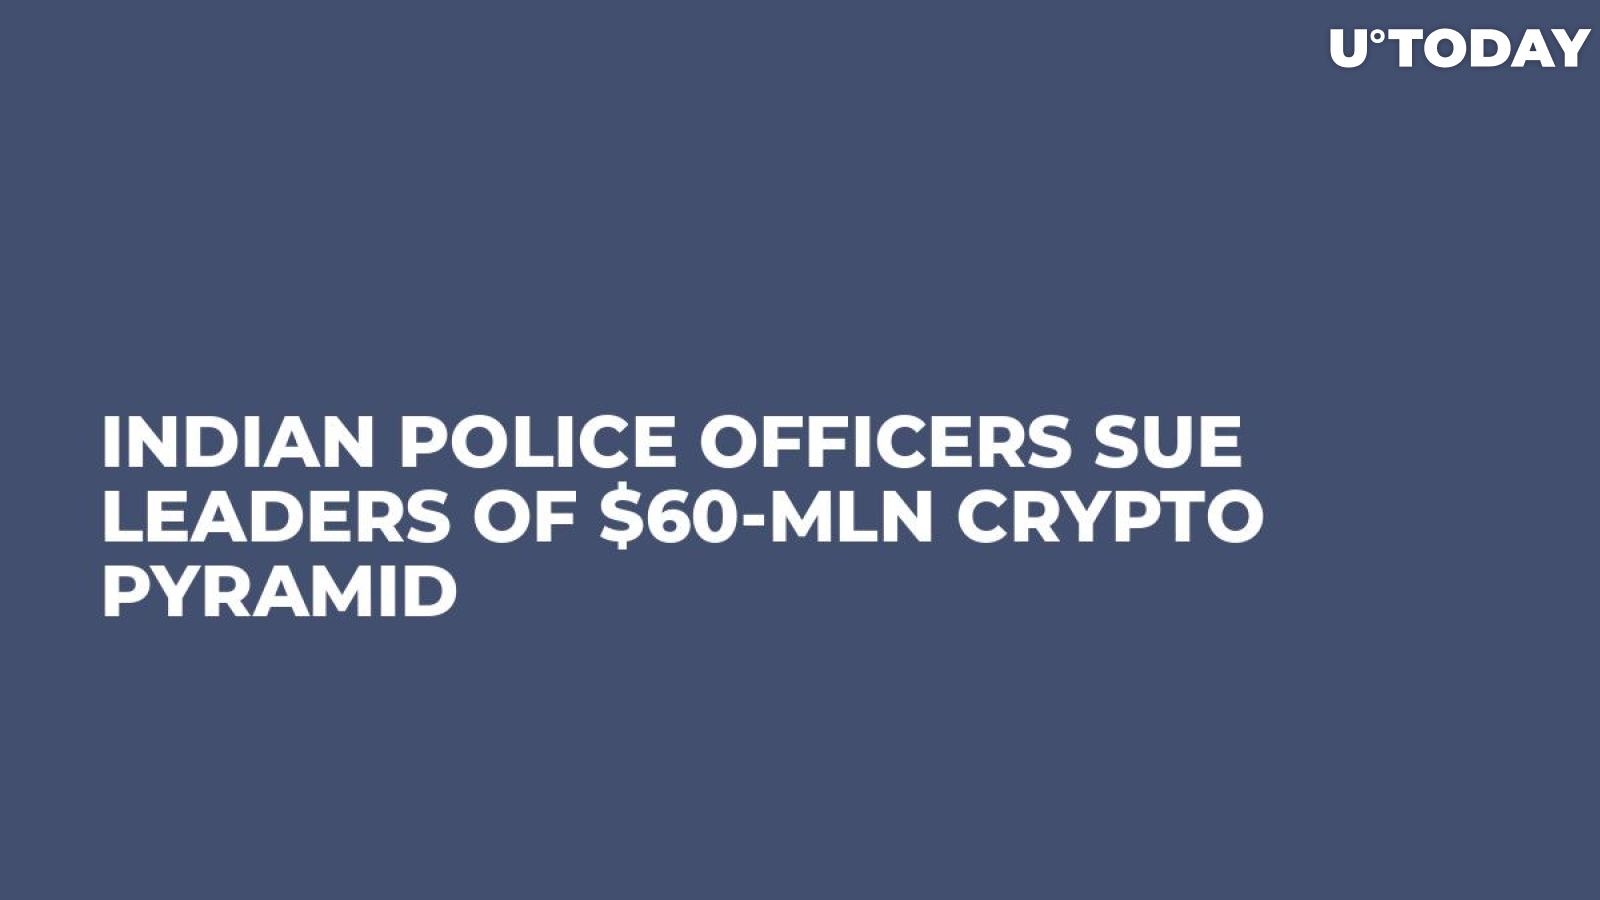 Indian Police Officers Sue Leaders of $60-Mln Crypto Pyramid